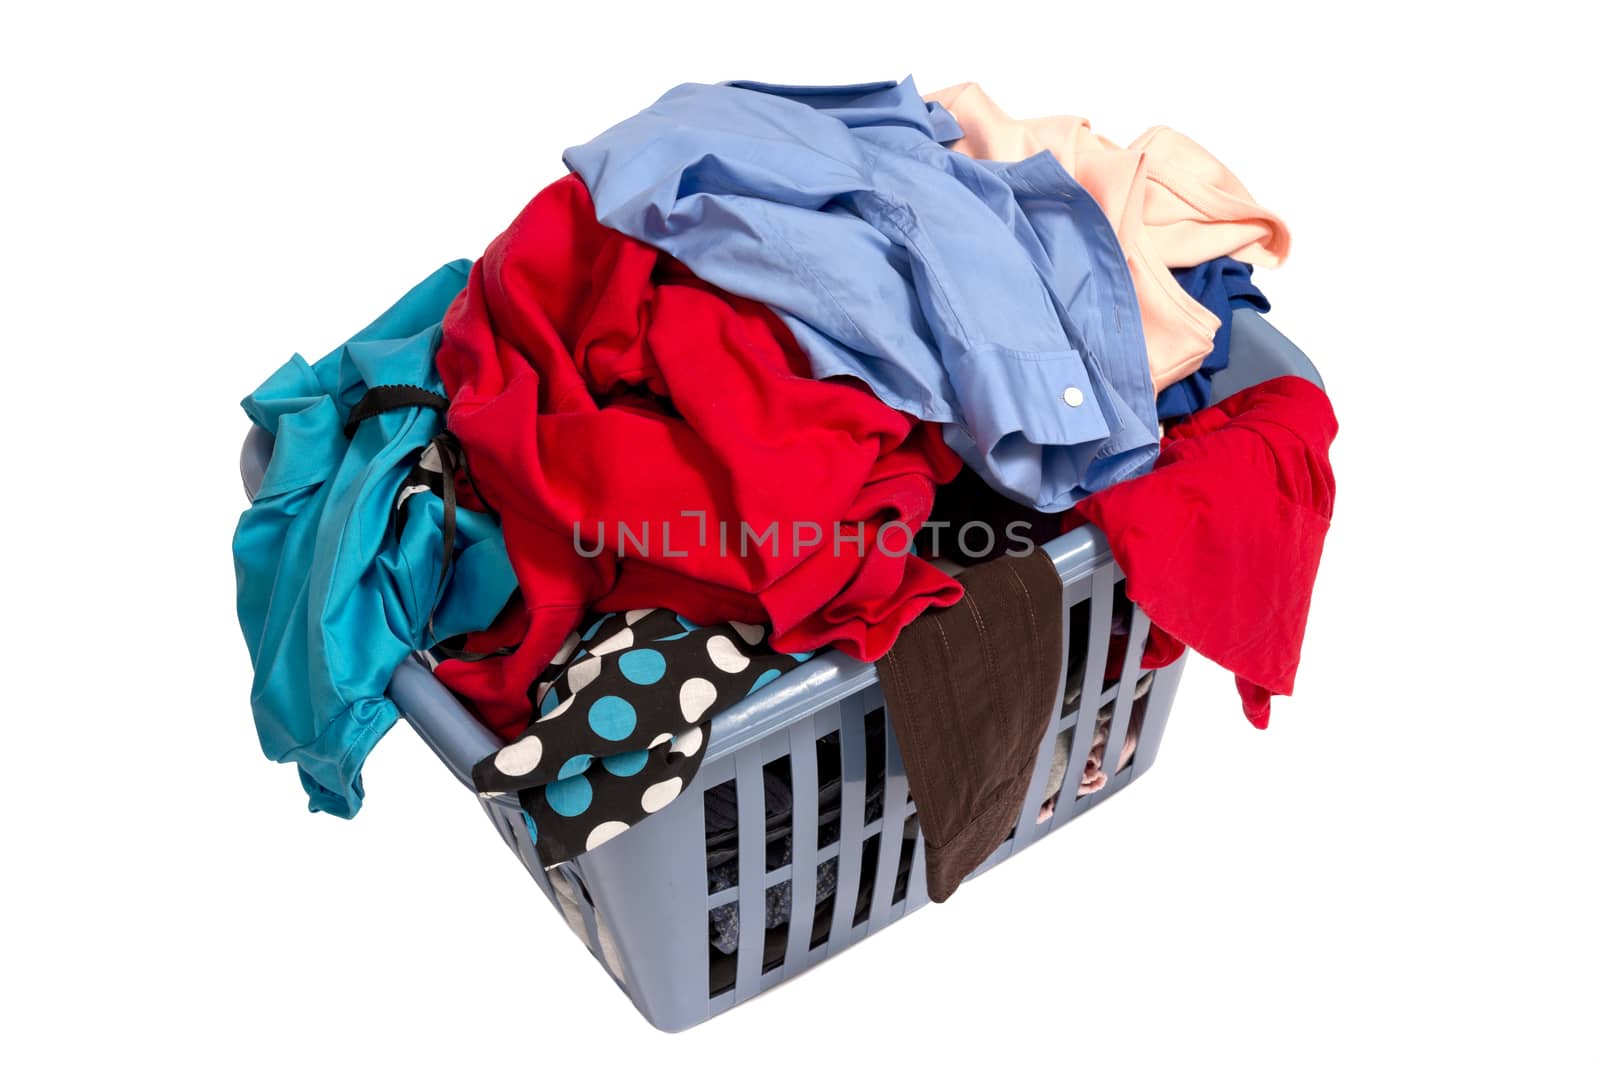 Pile Of Dirty Laundry In Large Basket by stockbuster1